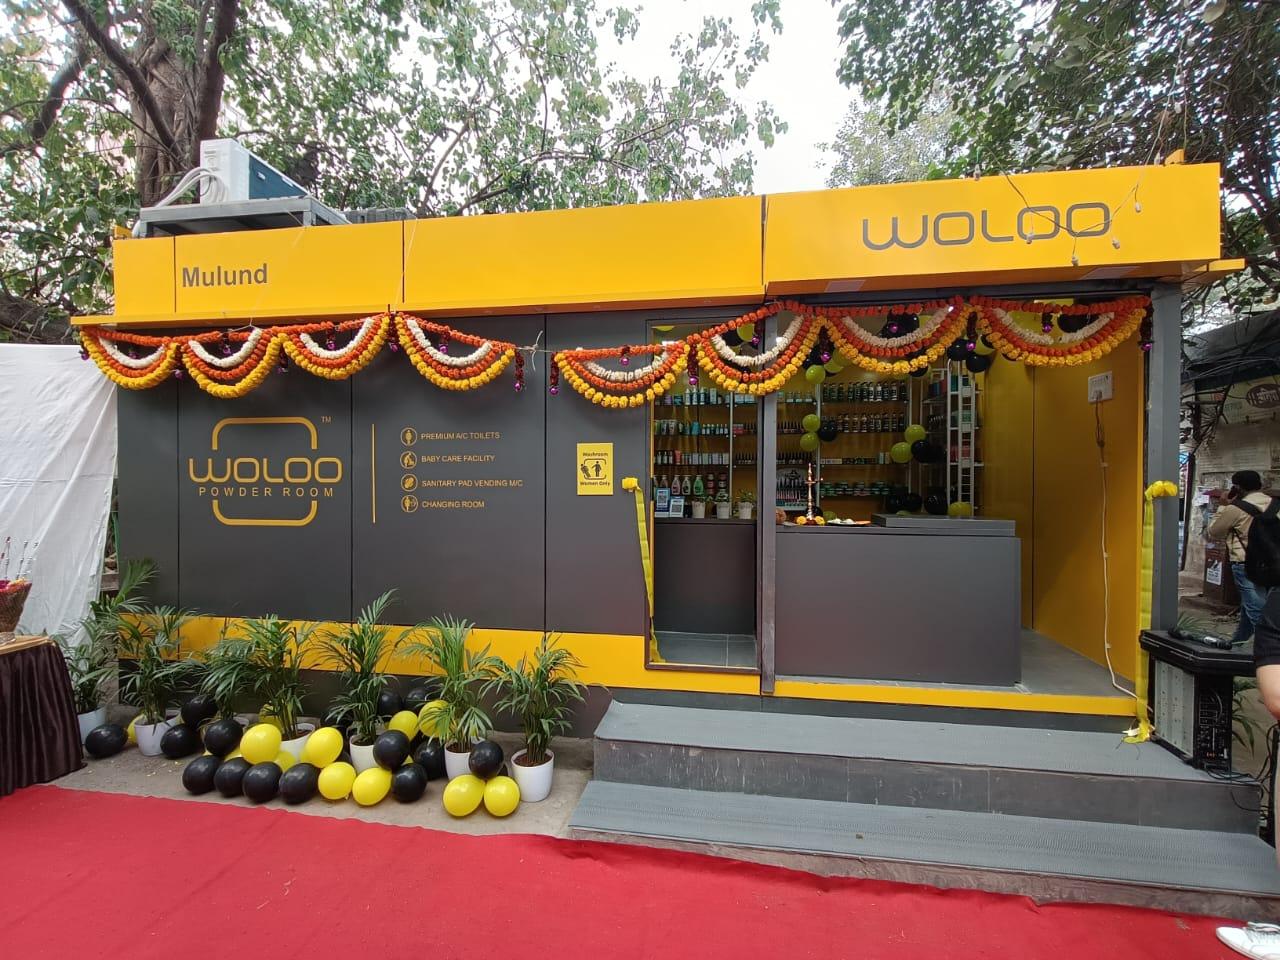 The 'Woloo Women toilet' is an innovative concept with various facilities such as maintained toilet block